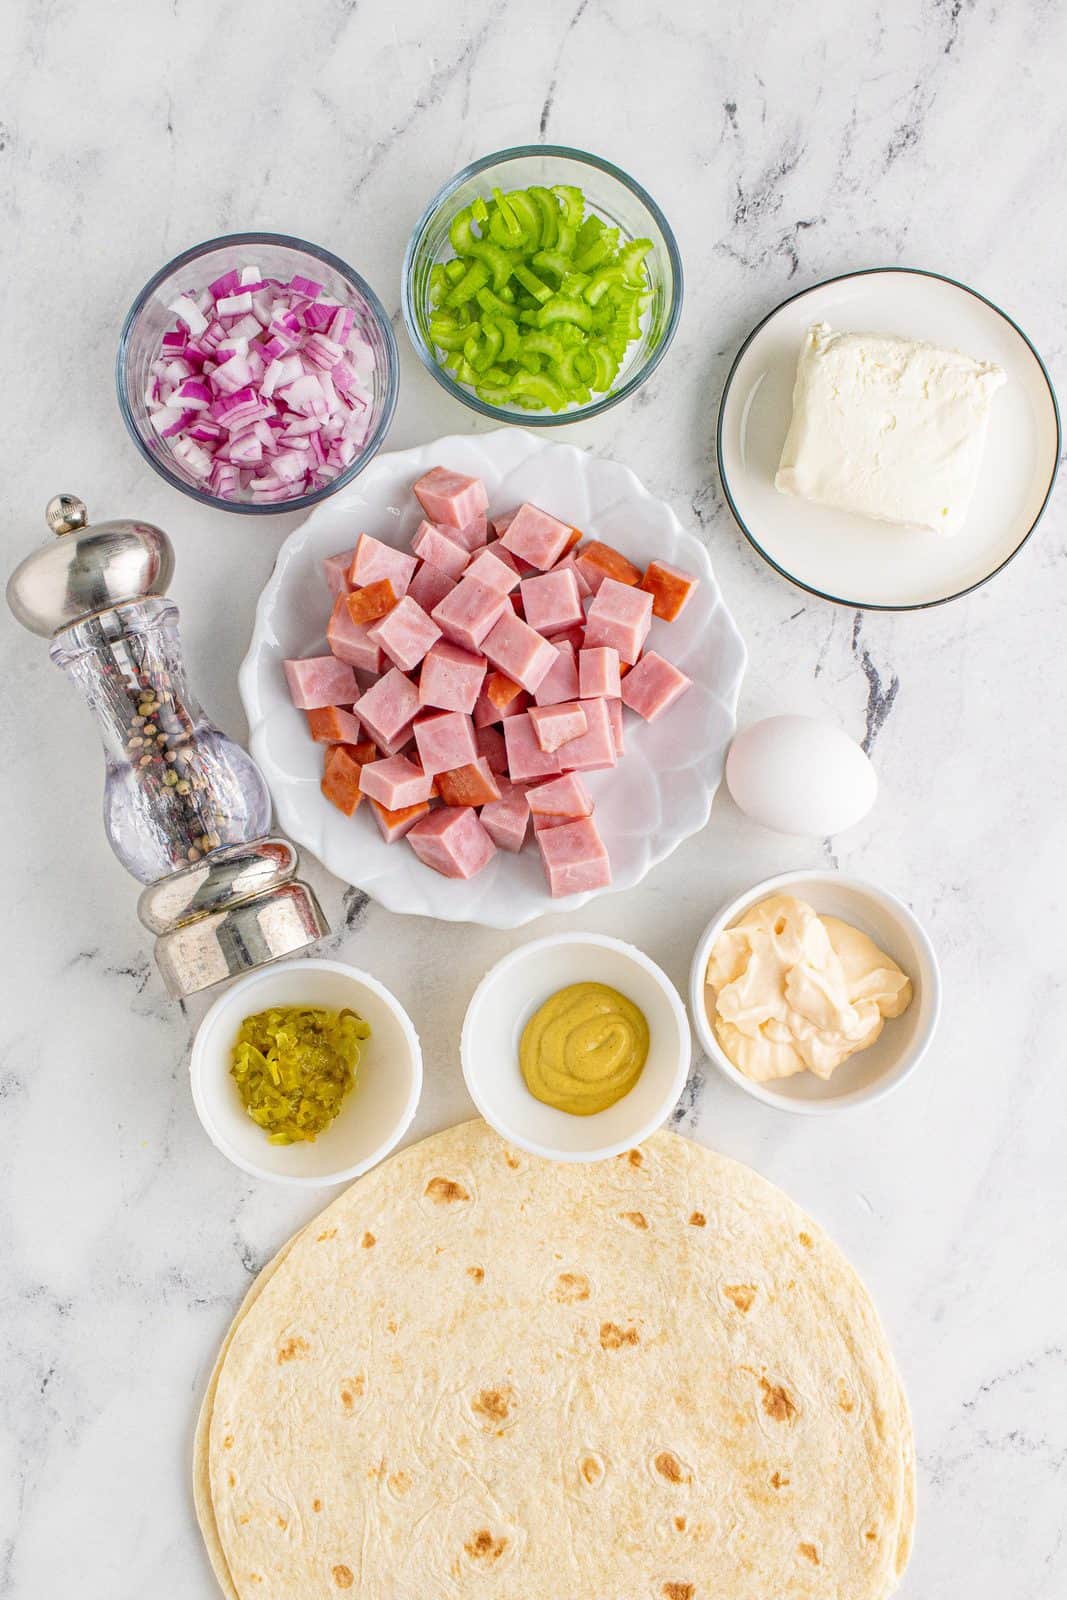 Ingredients needed: cooked ham, hard-boiled egg, celery, red onion, cream cheese, mayonnaise, dijon mustard, sweet pickle relish, black pepper and tortillas.